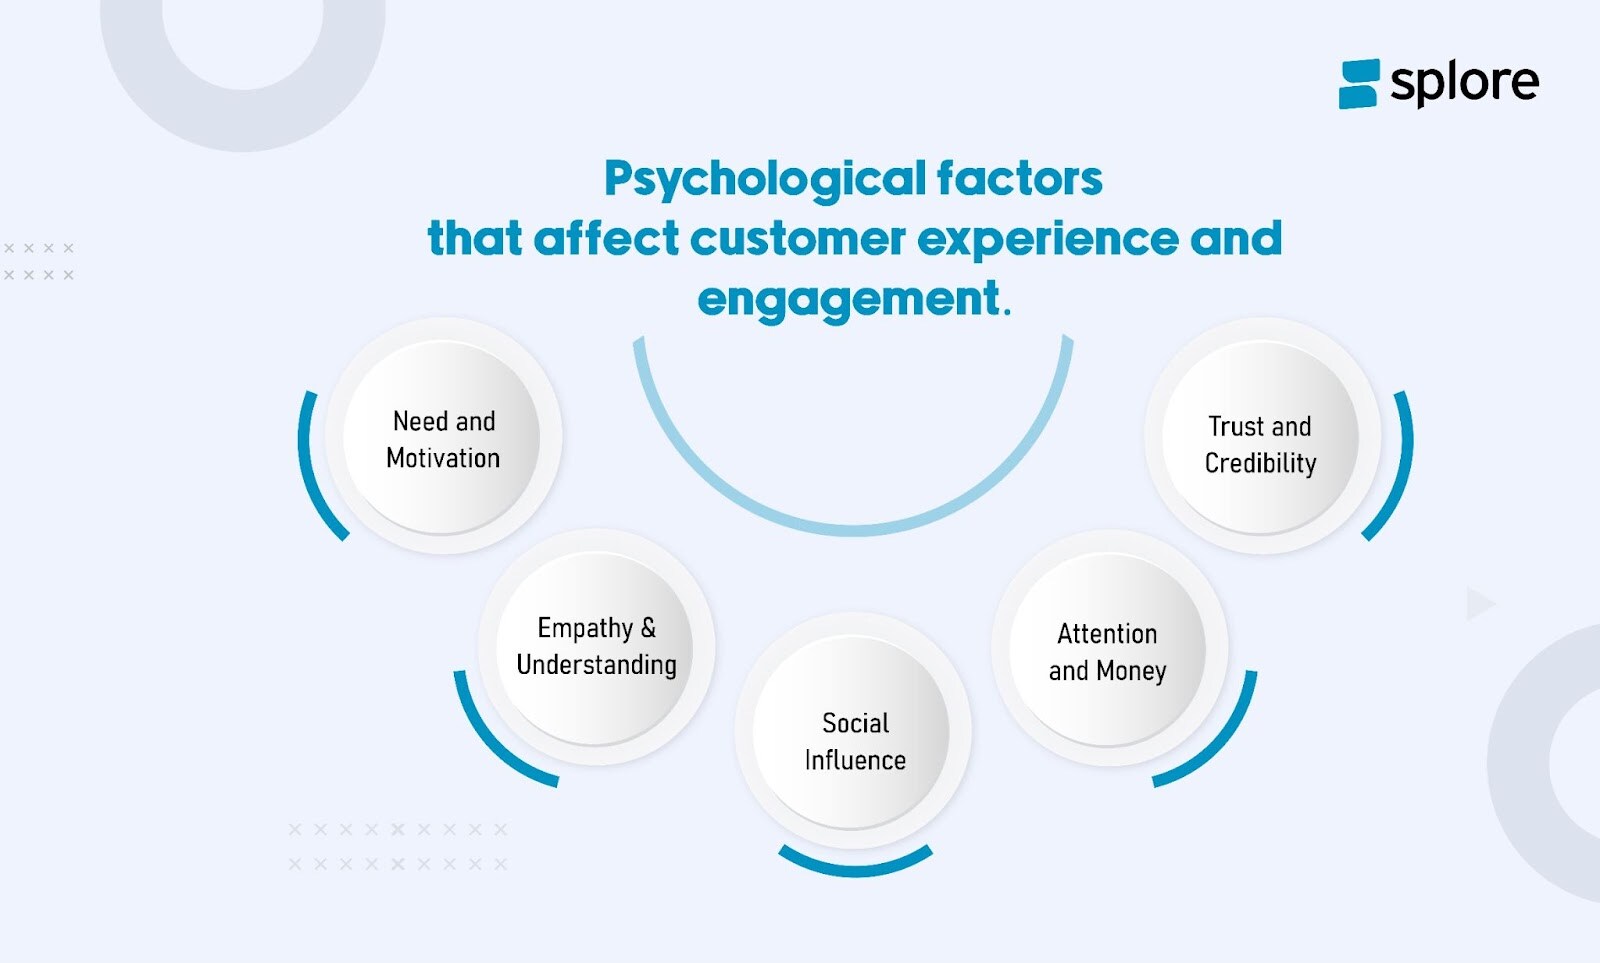 Phychological factors that affect customer experience and engagement